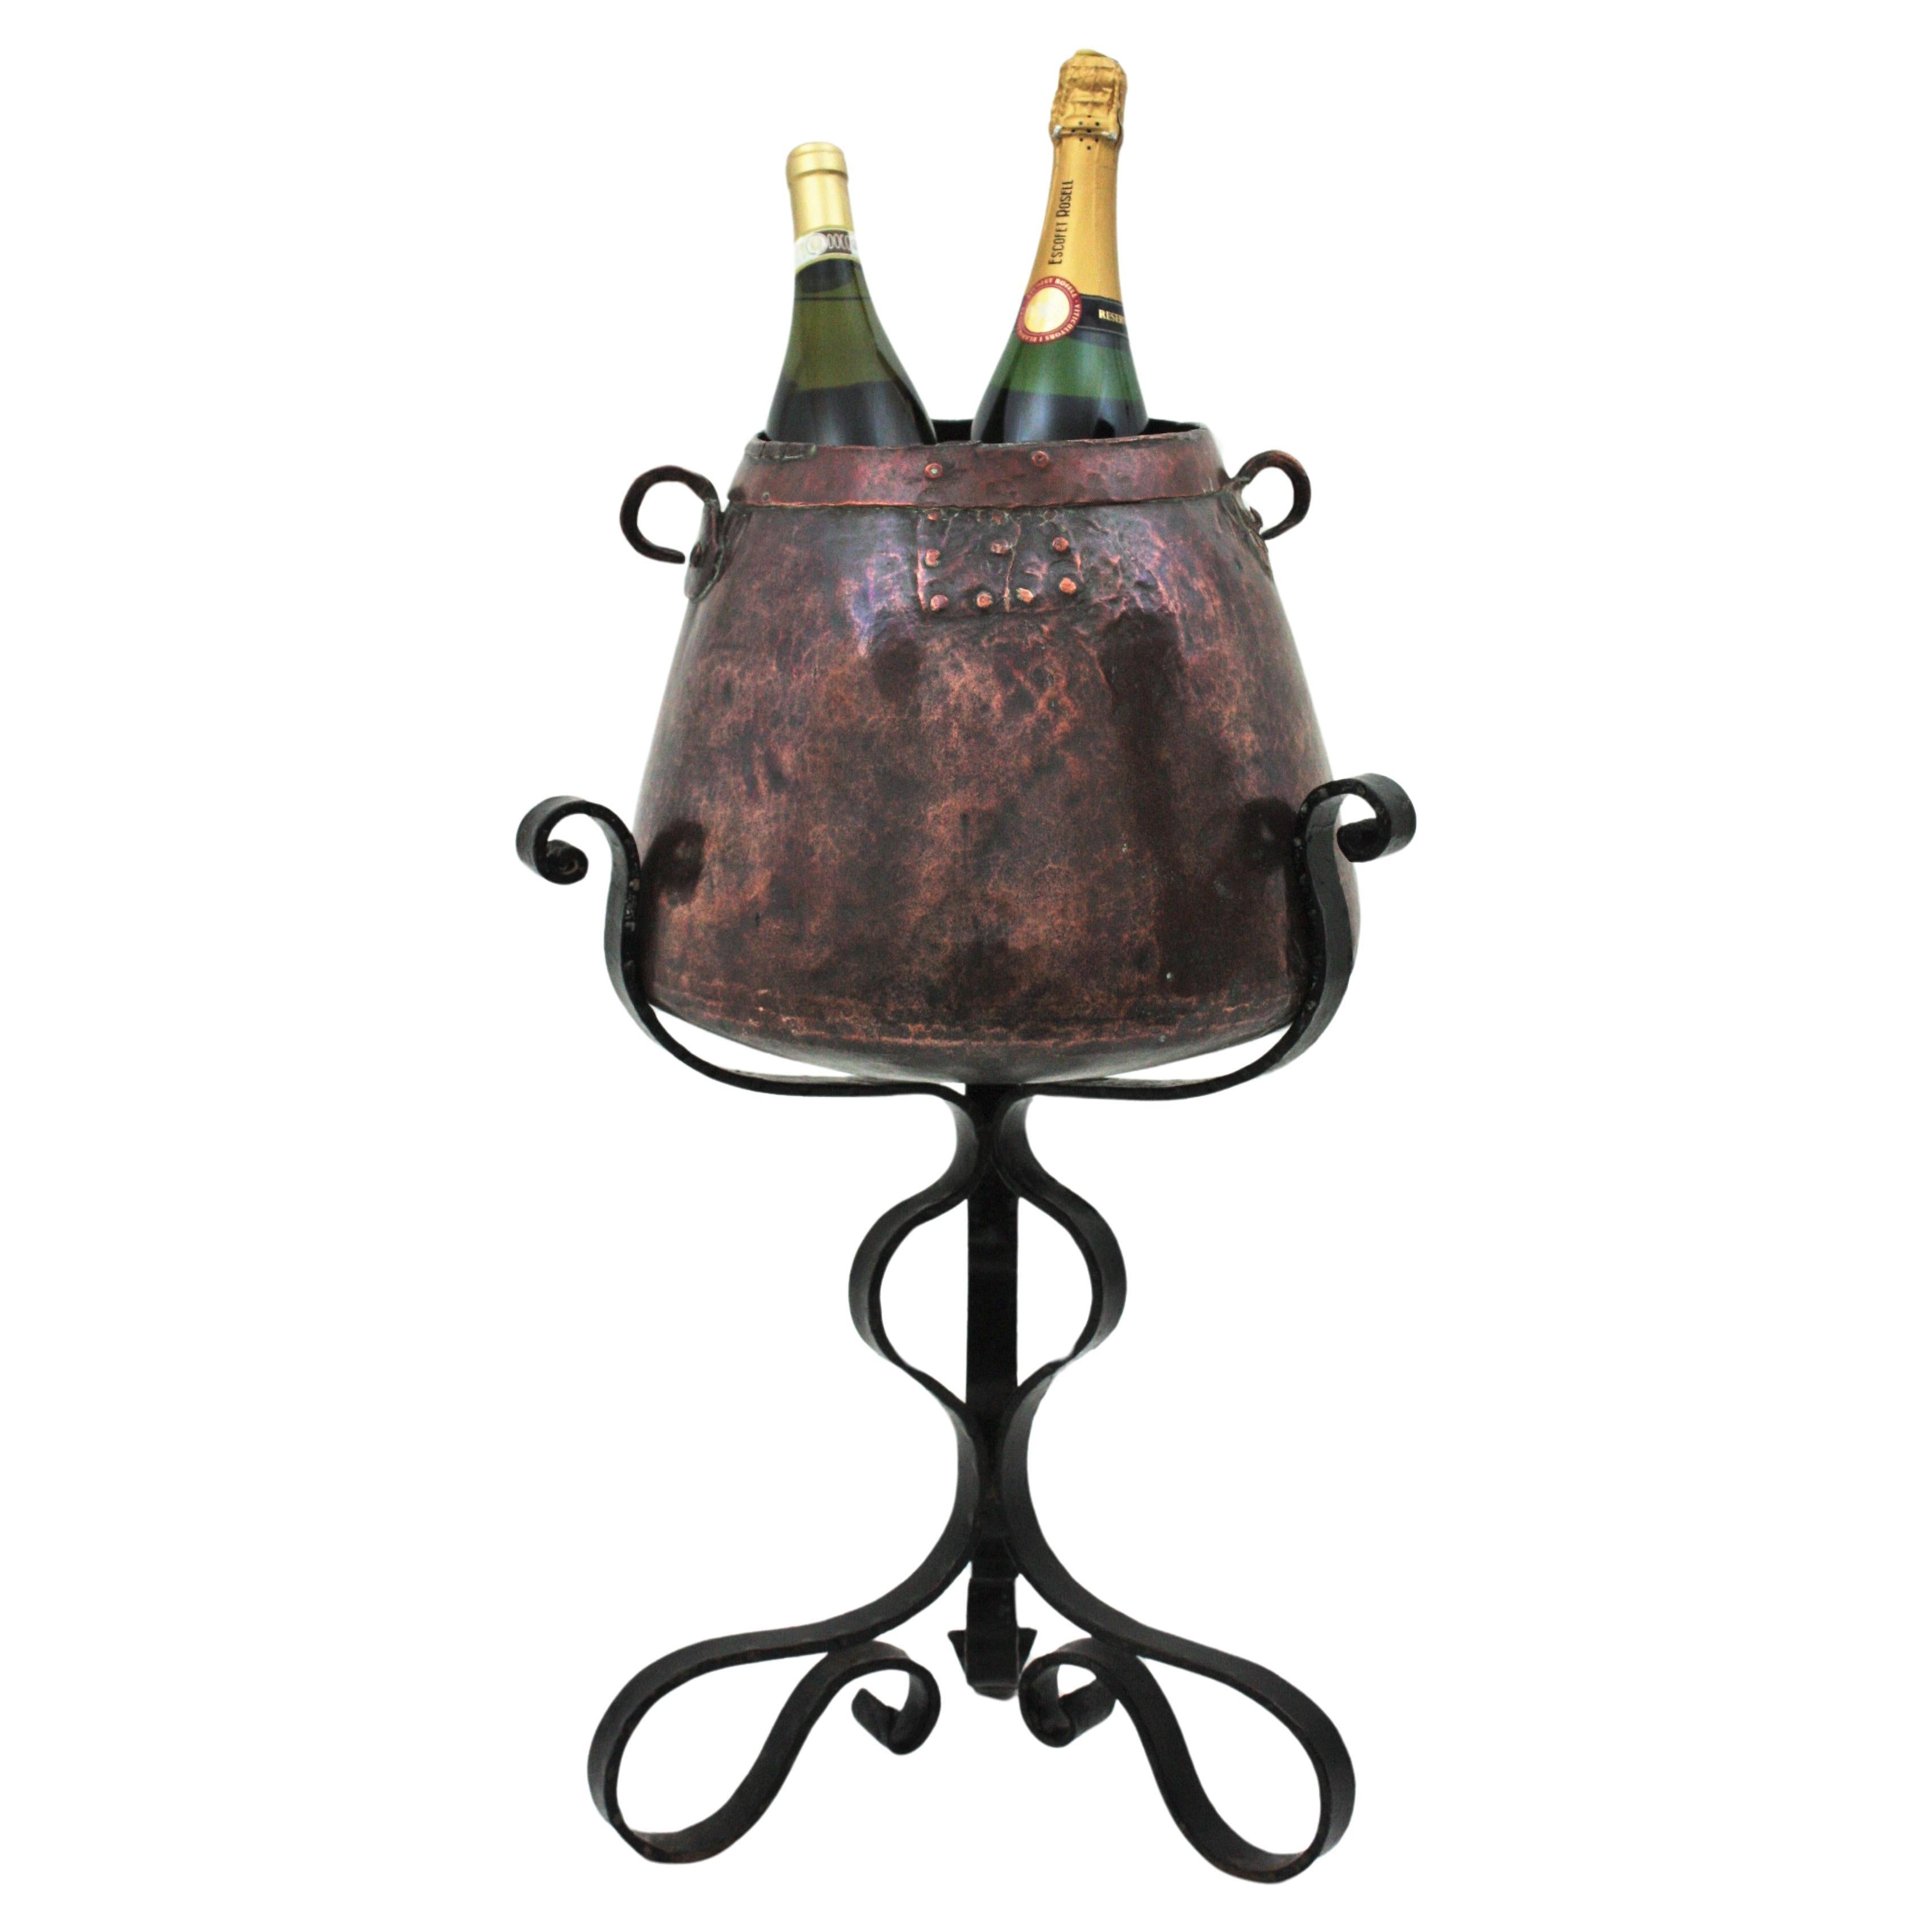 Cauldron Ice Bucket Champagne Cooler on Tripod Stand, Copper and Iron